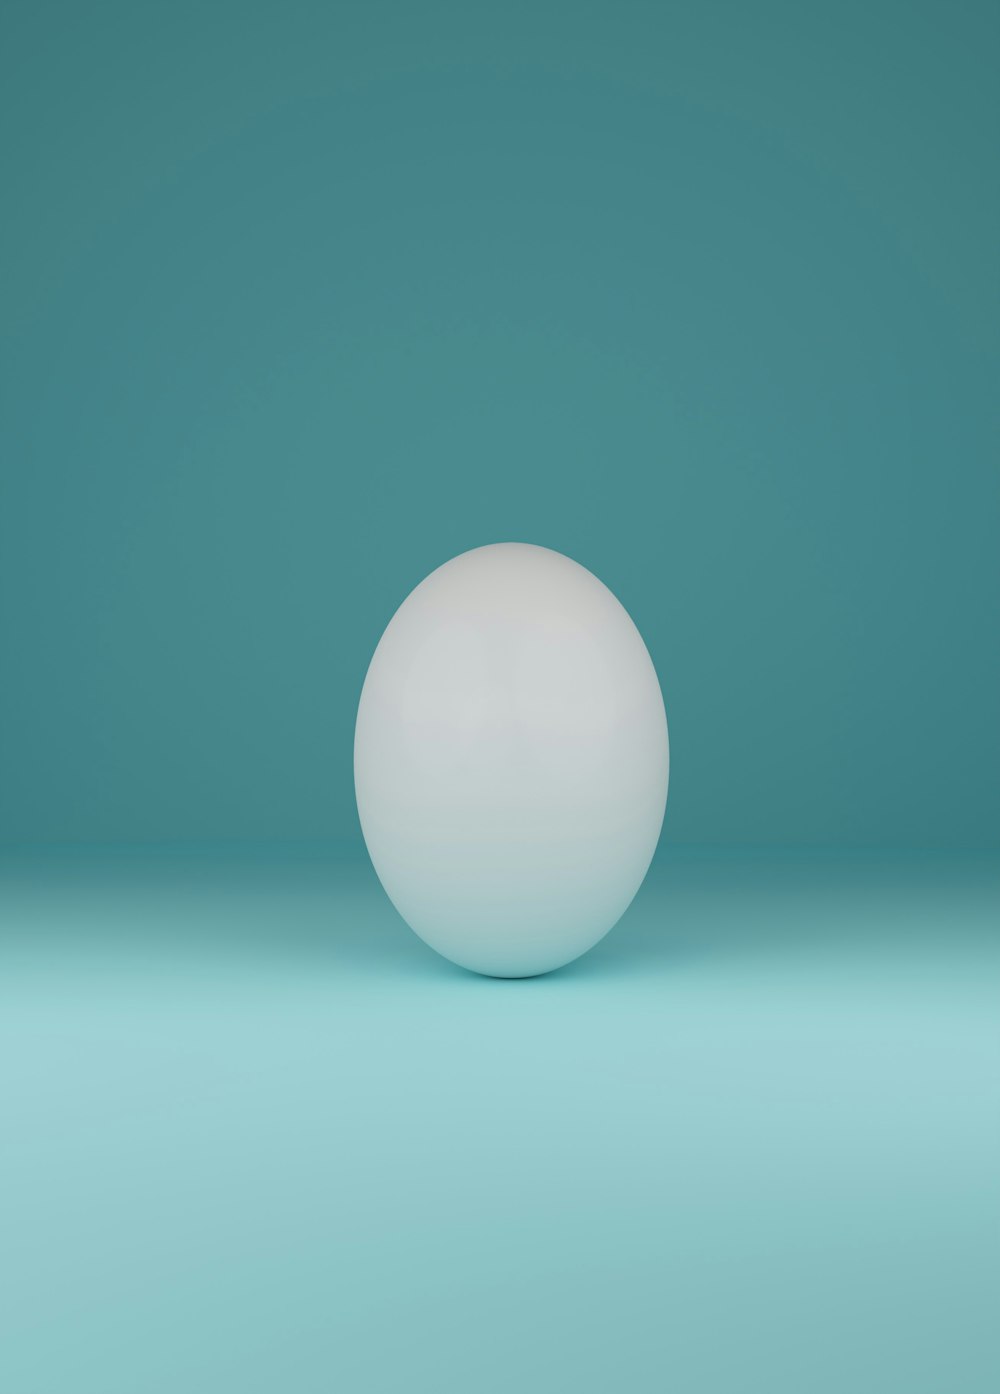 a white ball sitting on top of a blue surface